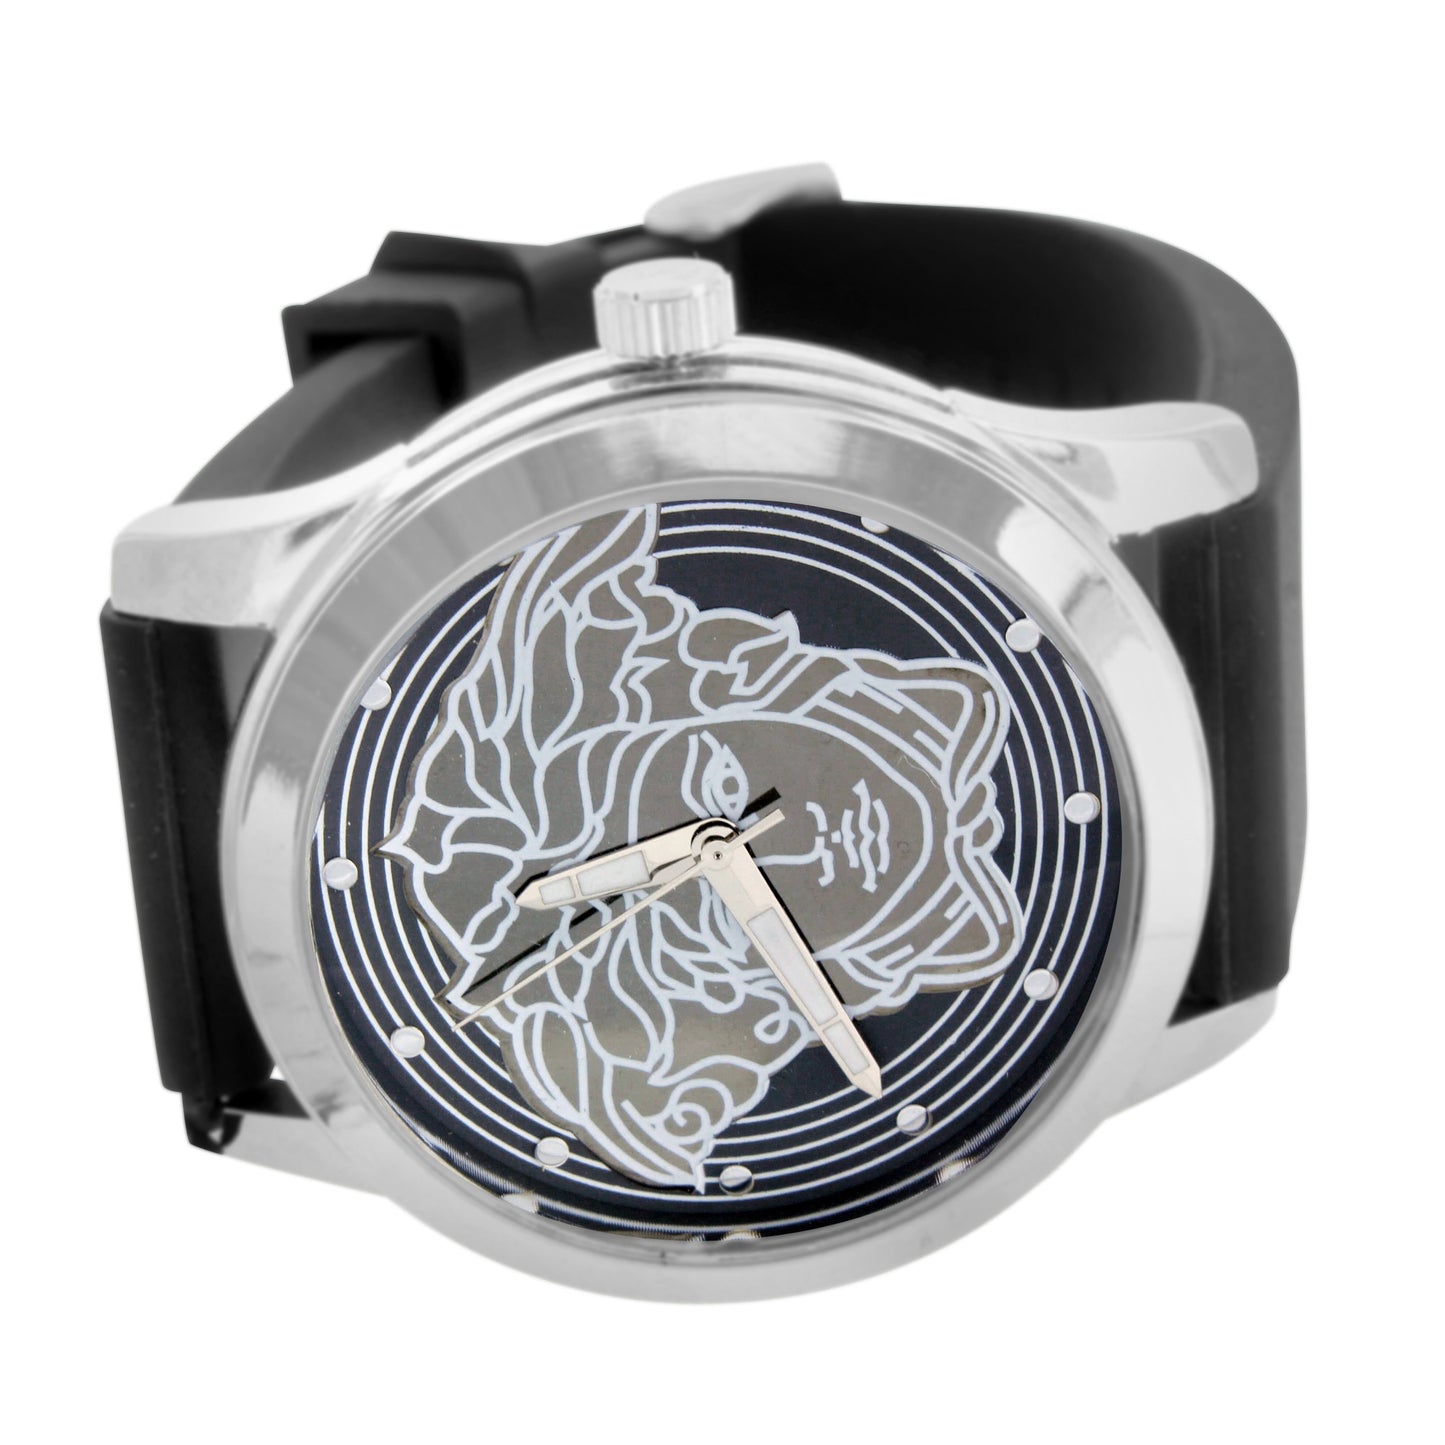 White Gold Tone Watch Medusa Dial Limited Edition